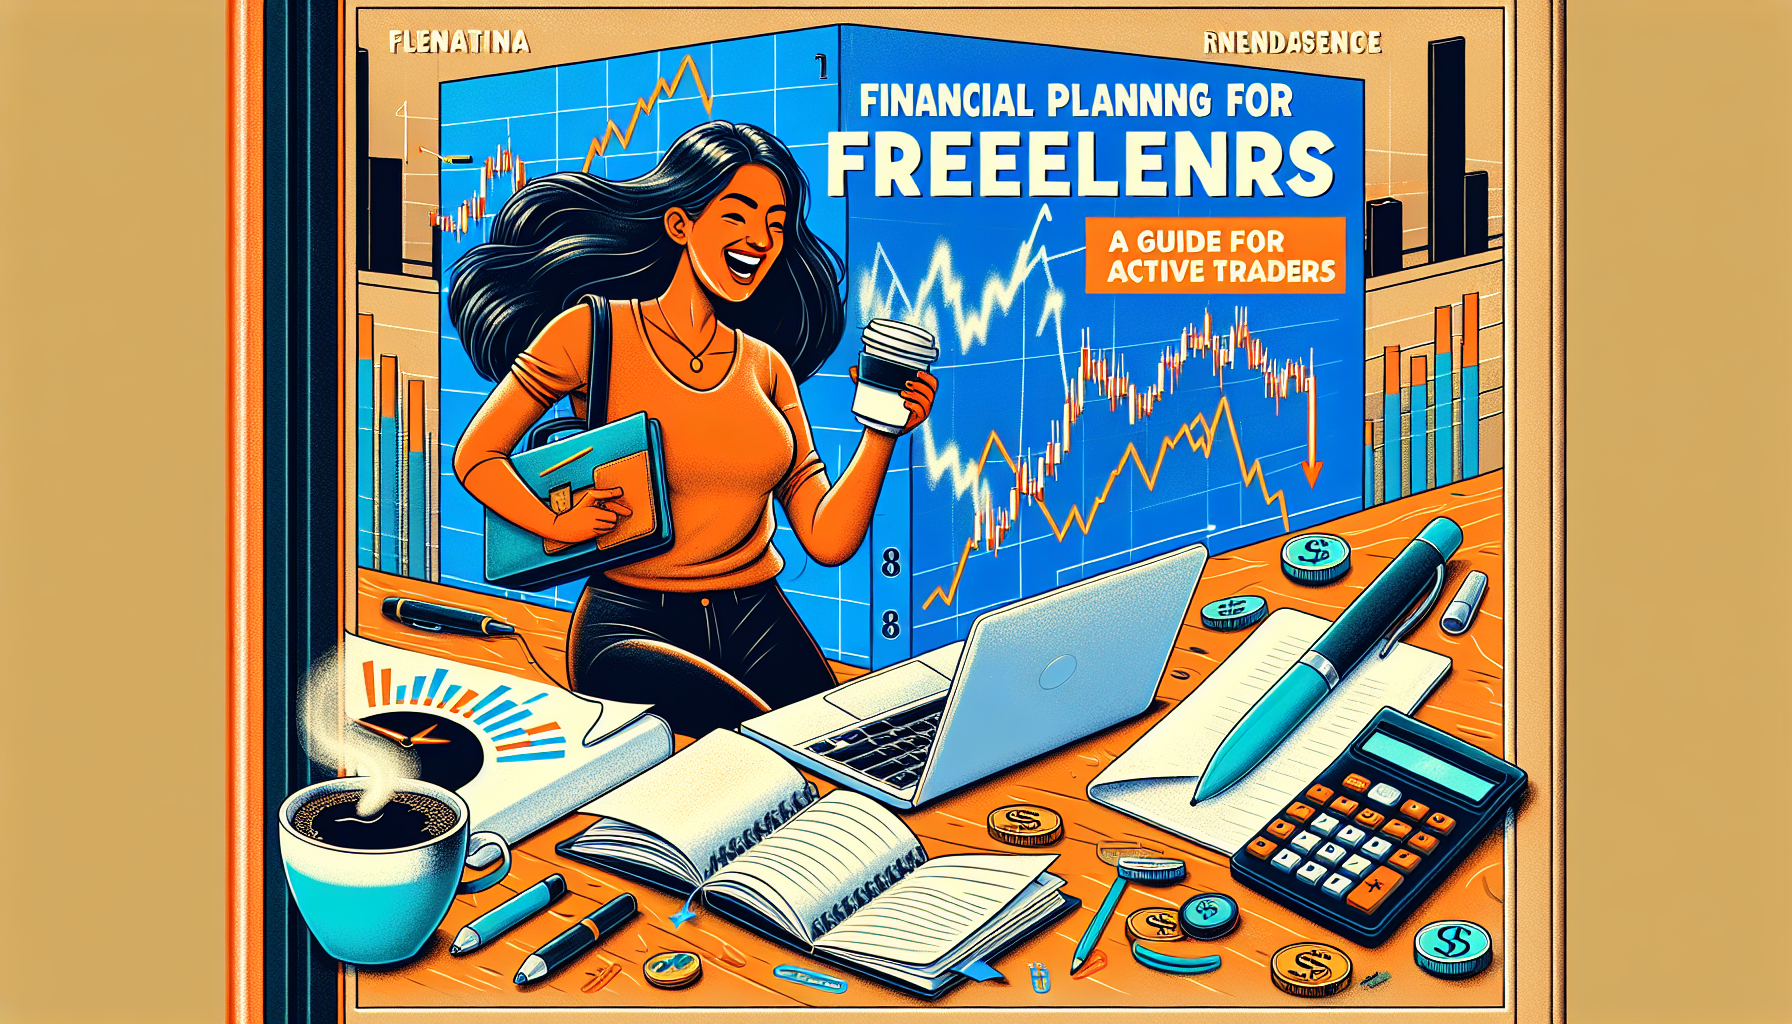 Financial Planning for Freelancers: A Guide for Active Traders